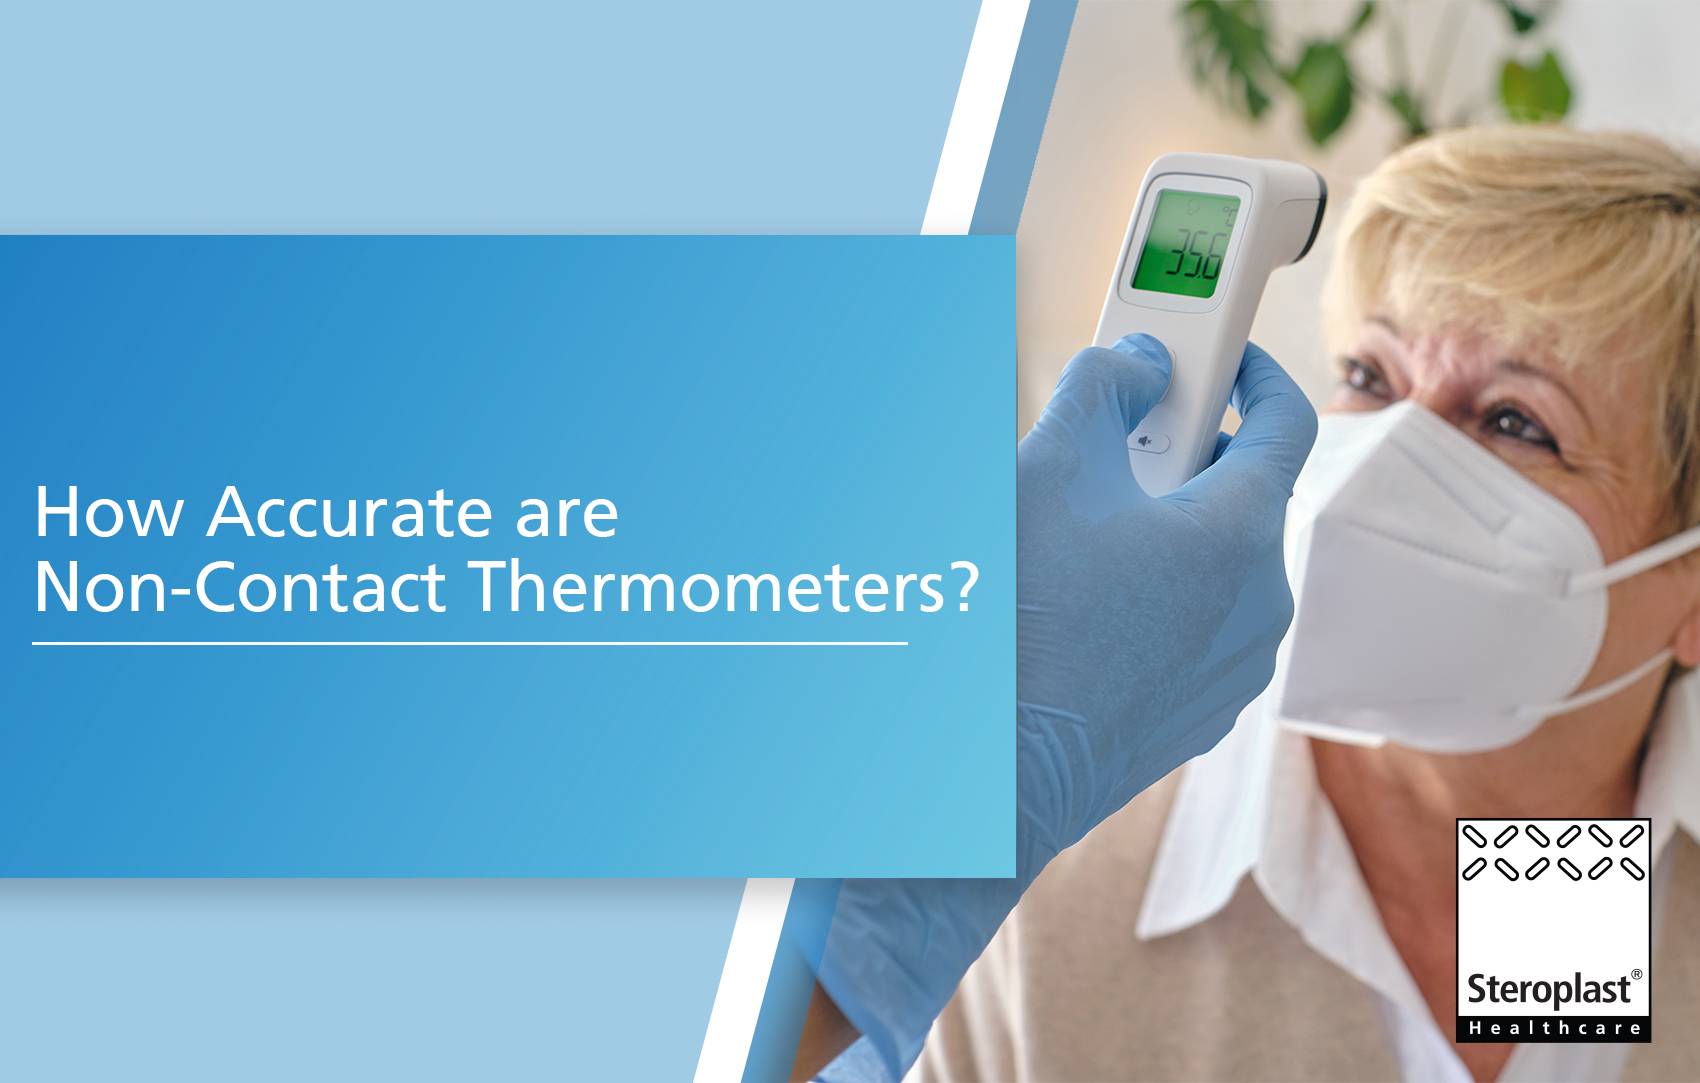 https://www.steroplast.co.uk/media/amasty/blog/How_Accurate_are_Non-Contact_Thermometers_copy.jpg